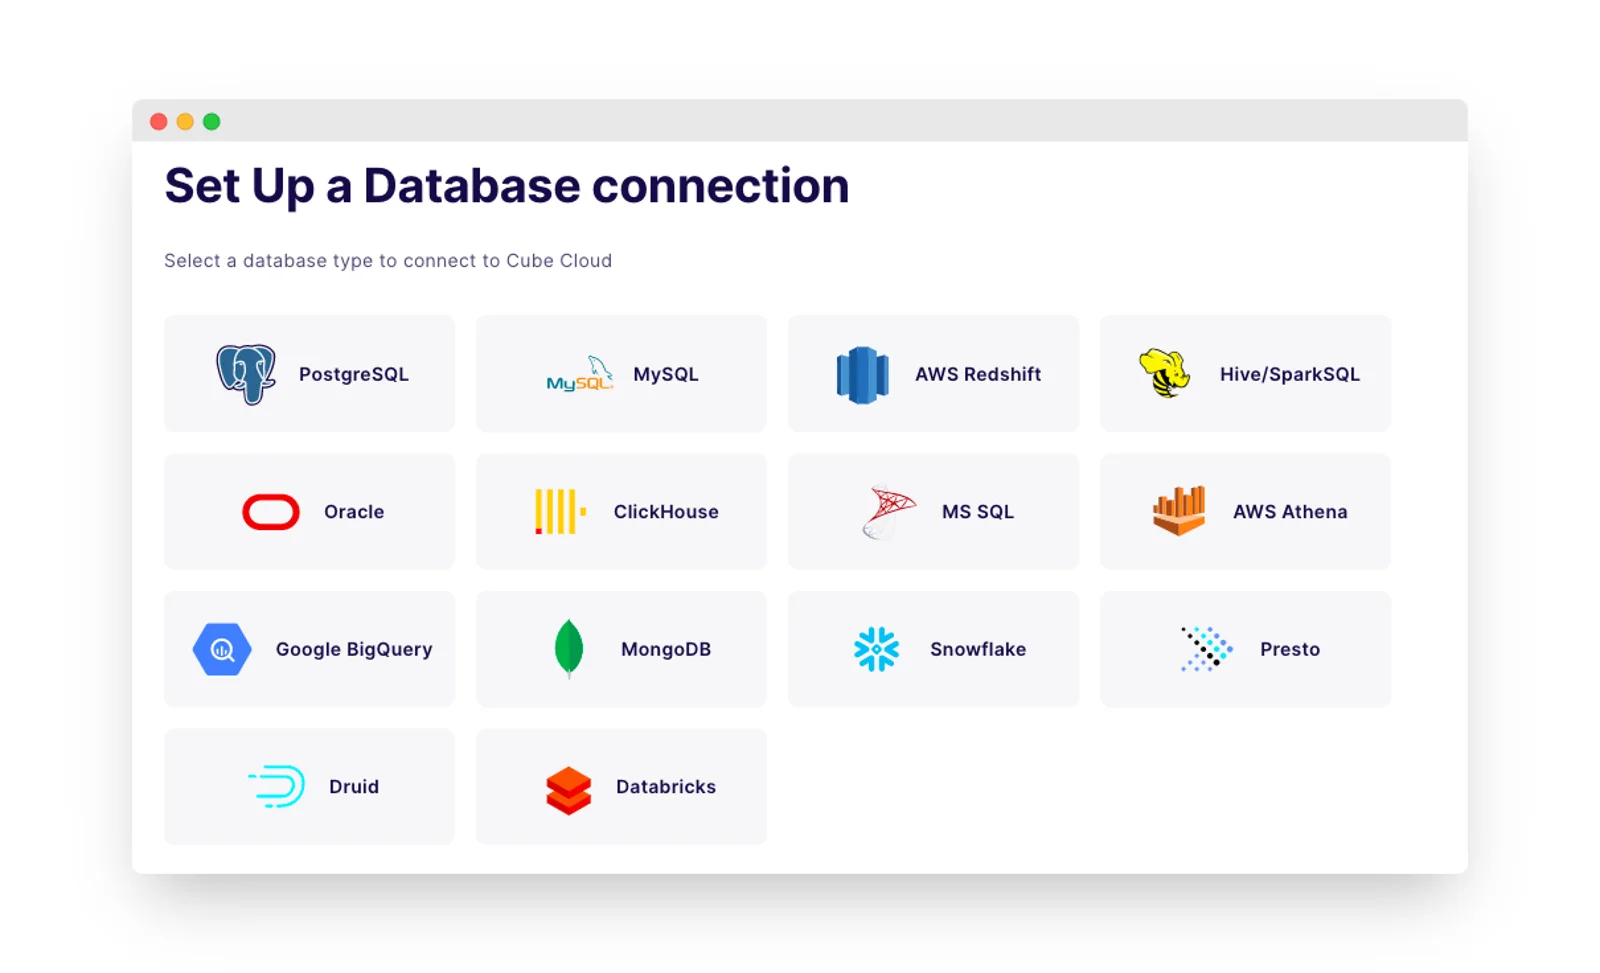 Database connections supported by Cube